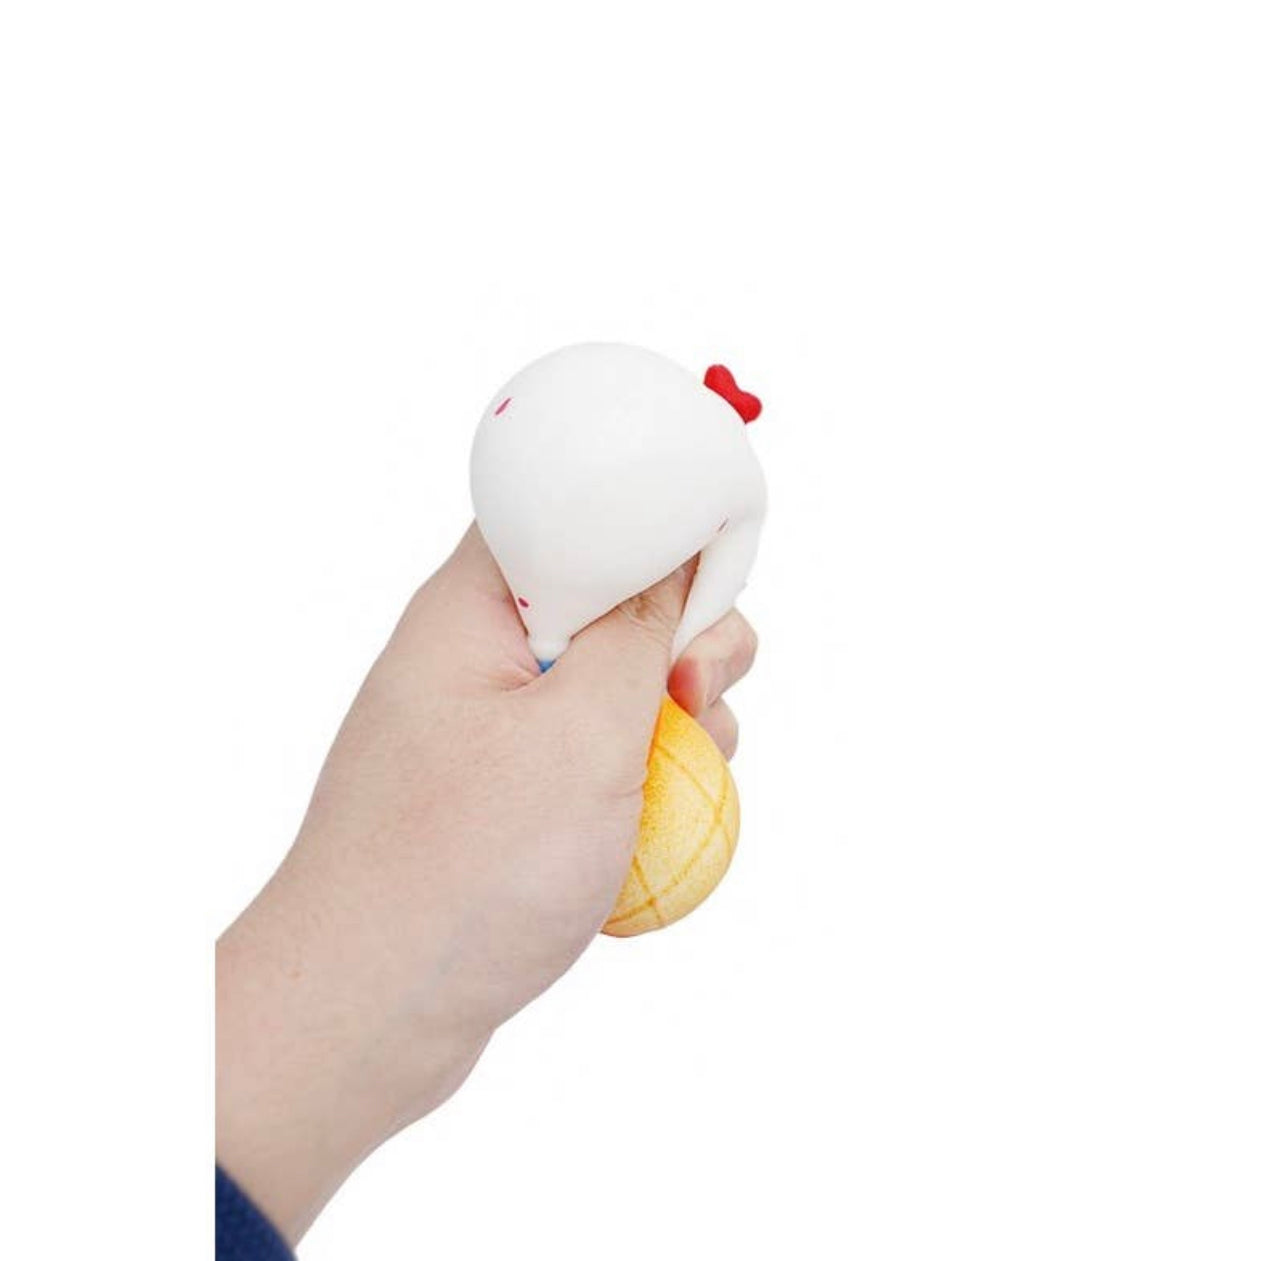 Cup Cake Soft Silicone Squishy Toy